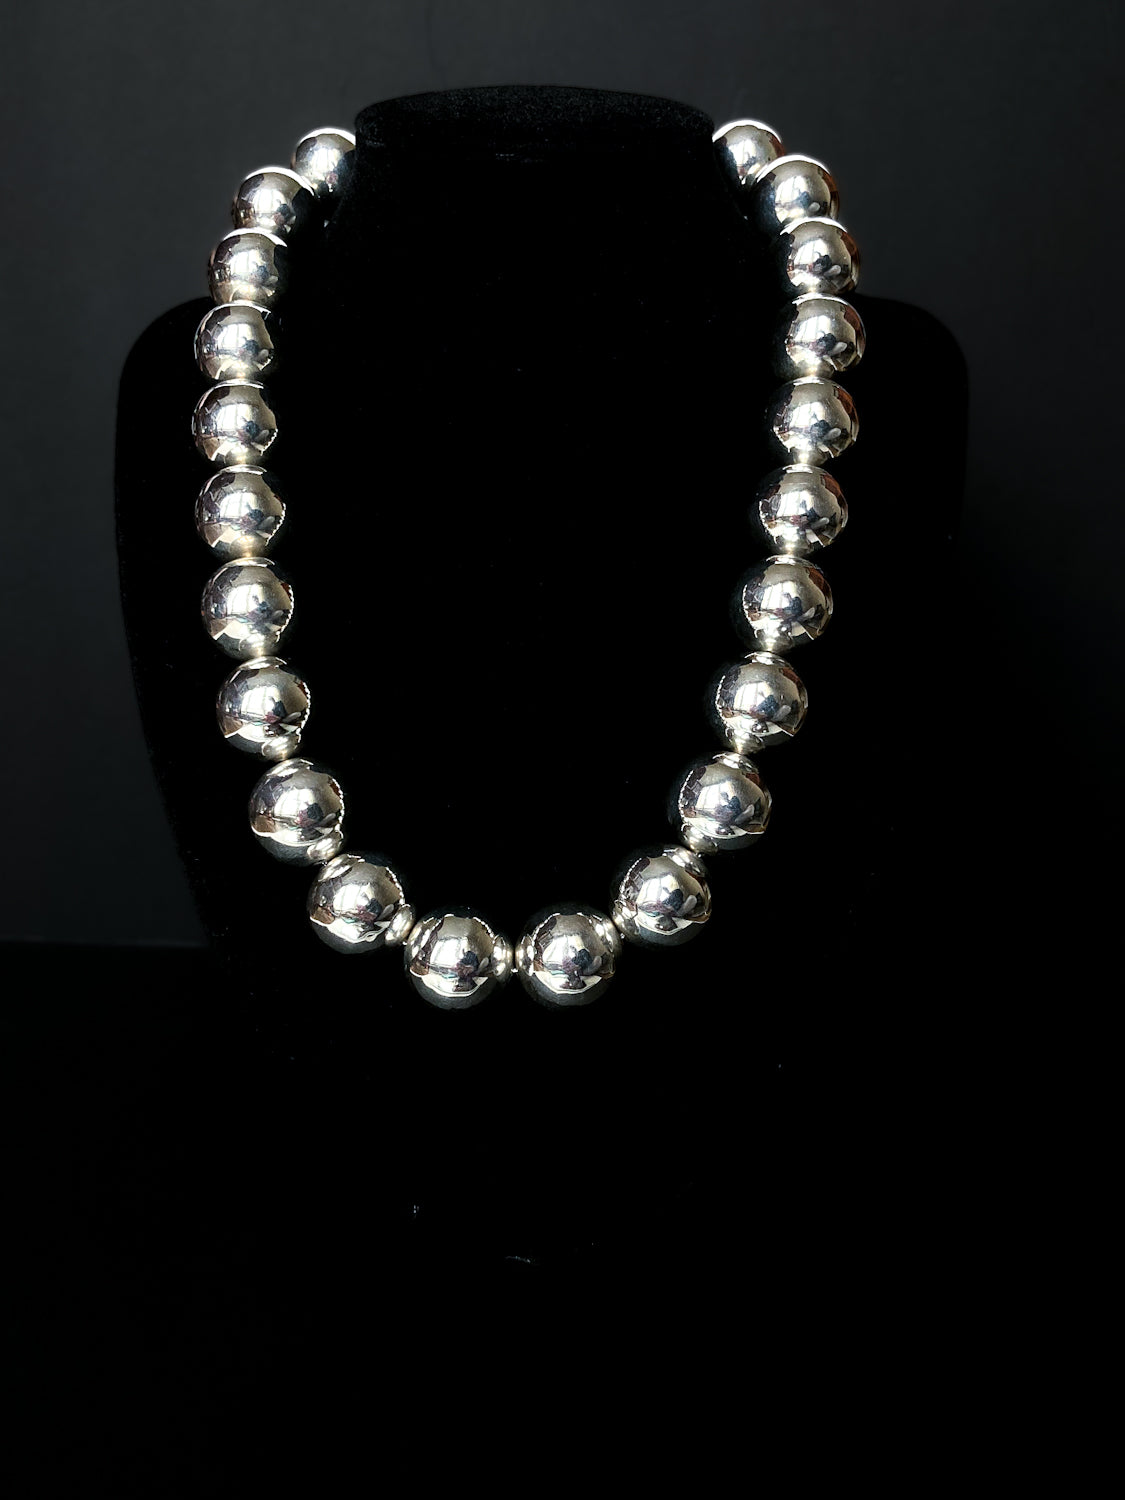 Tiffany & Co. Mexico Sterling Silver Large Orb Bead Statement Necklace